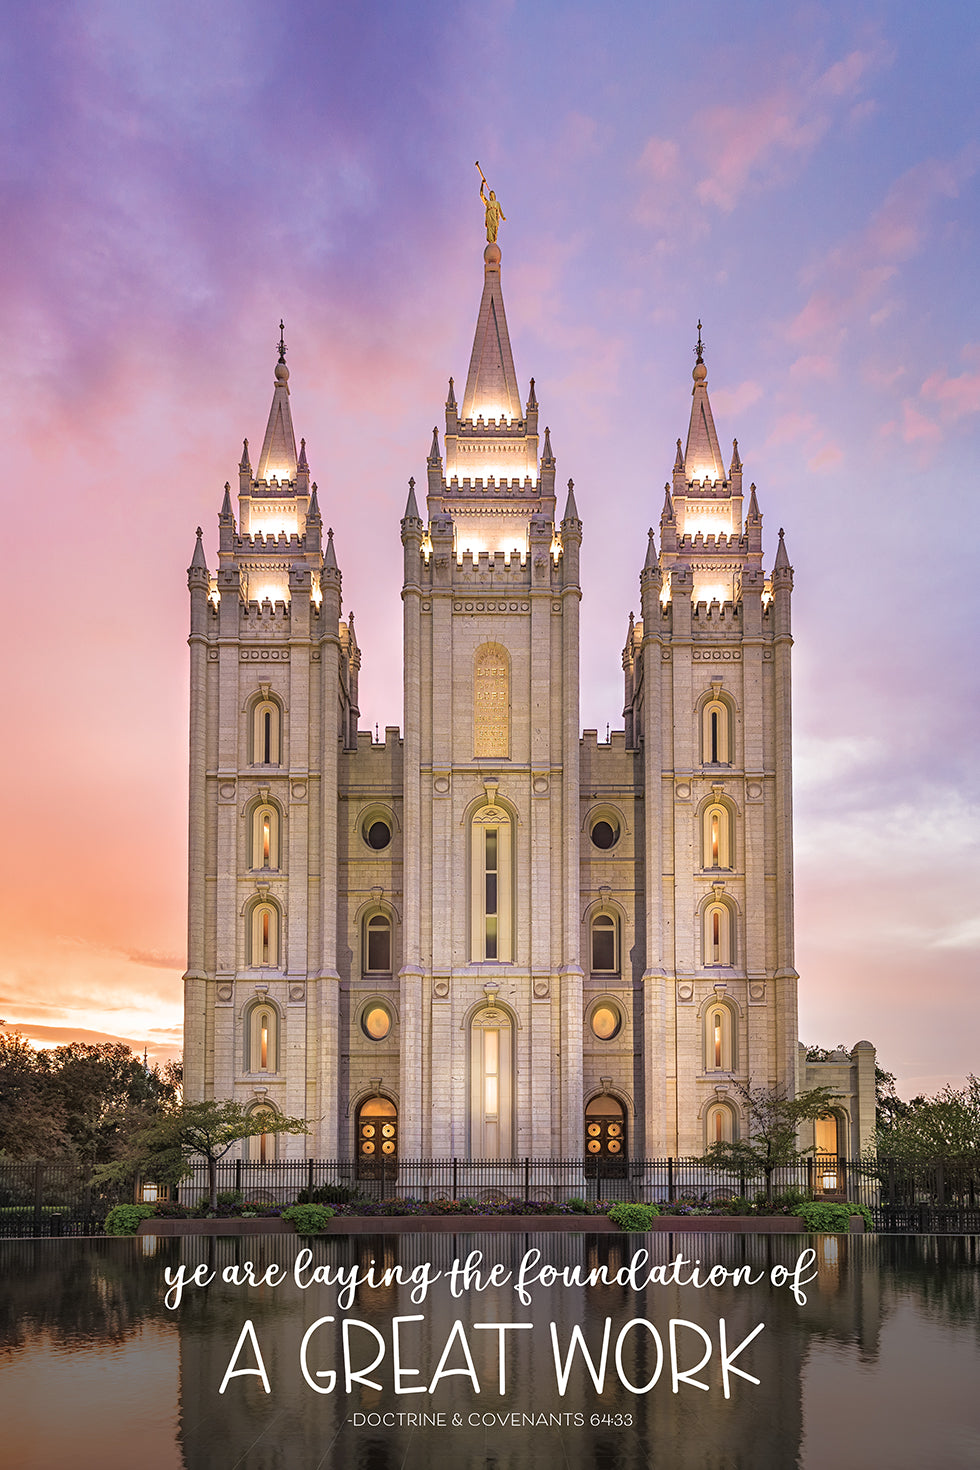 Salt Lake City Temple - Glimmer of Hope "Great Work" 12x18 repositionable poster